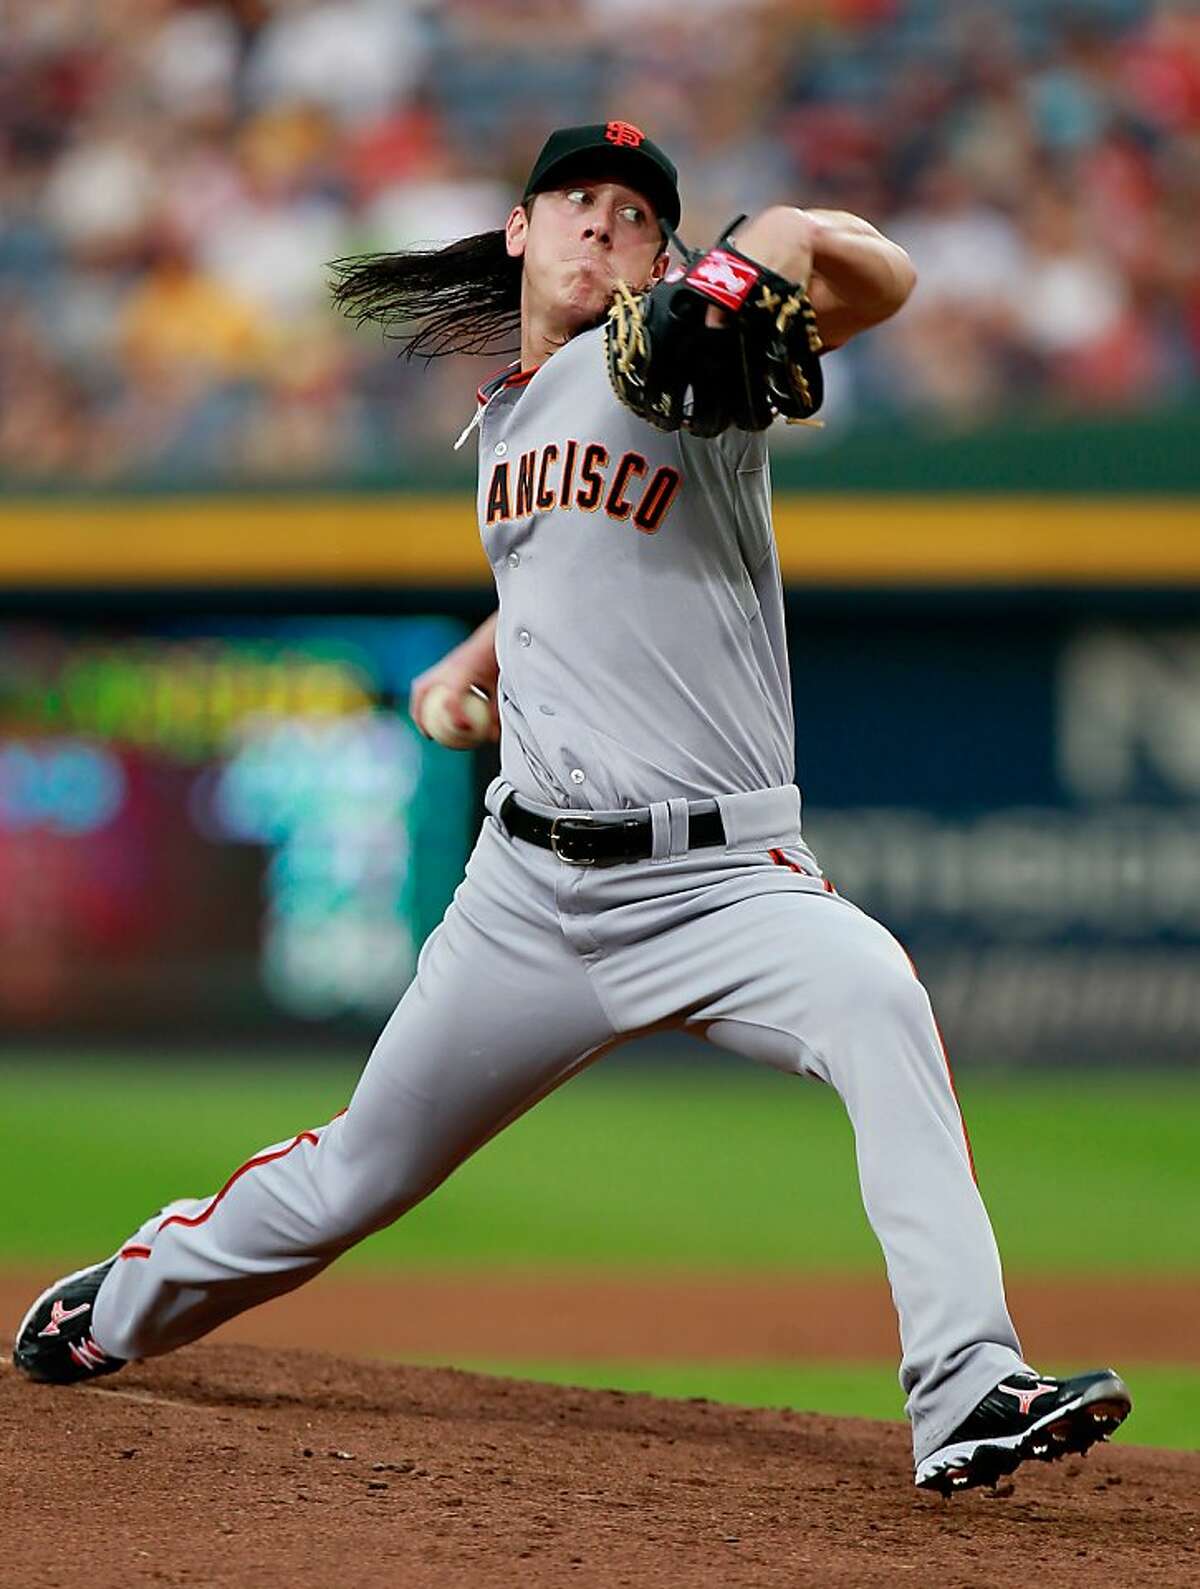 ATLANTA, GA - AUGUST 18: Tim Lincecum #55 of the San Francisco Giants pitches to the Atlanta Braves at Turner Field on August 18, 2011 in Atlanta, Georgia. (Photo by Kevin C. Cox/Getty Images)